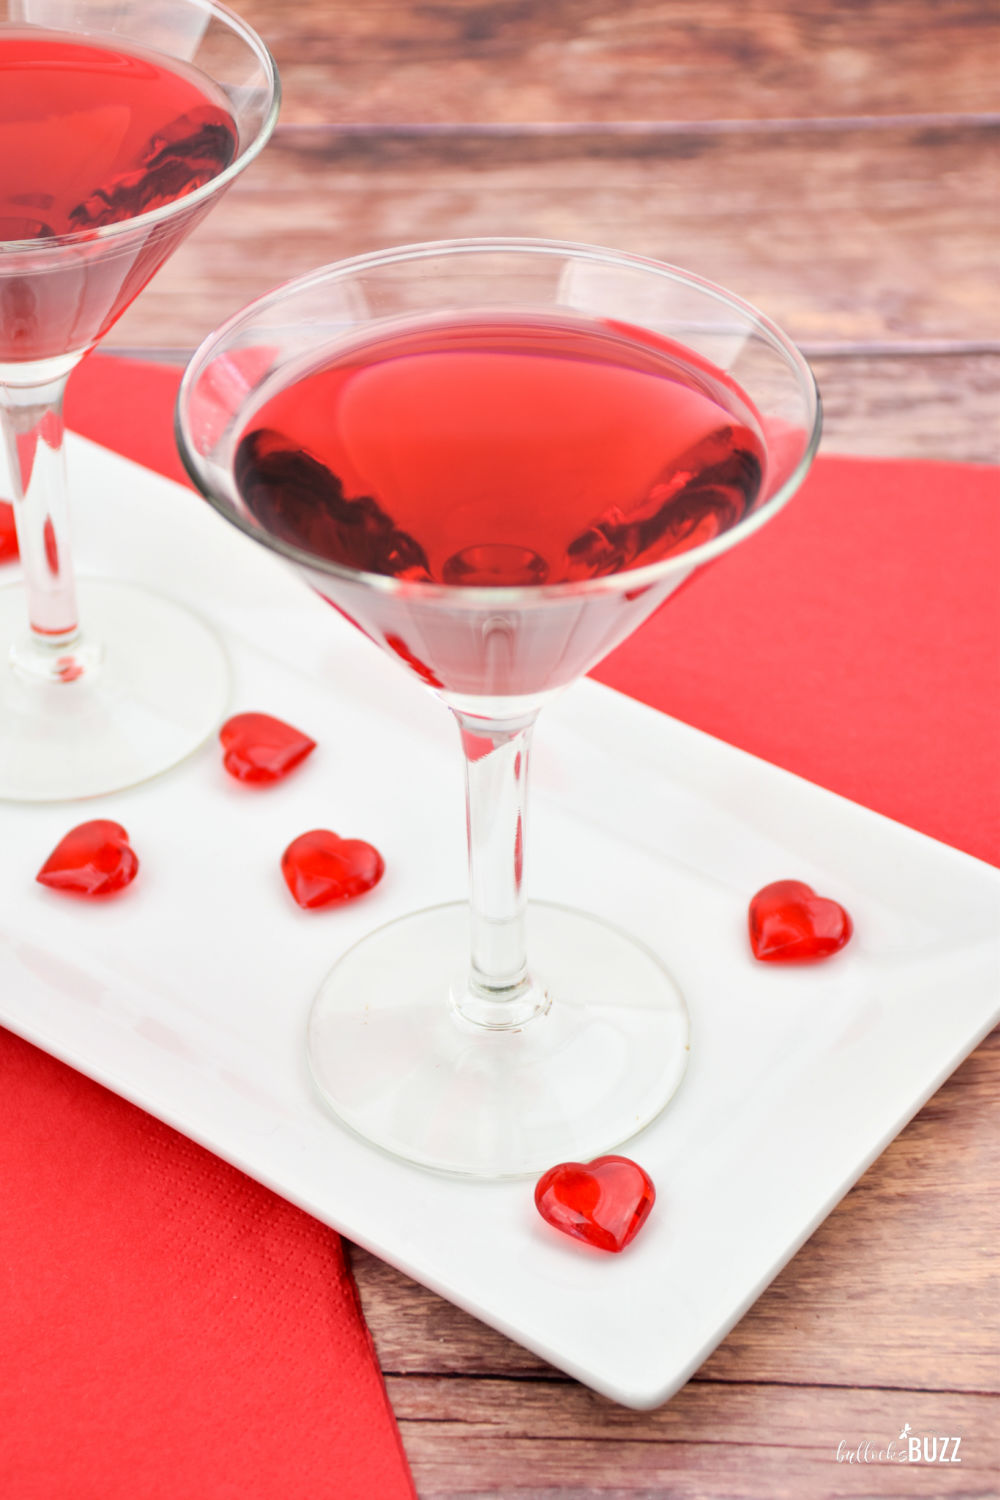 Cocktails are a staple for any celebration, but if you’re searching for an extra dose of color and flavor for your Valentine's Day, look no further than this Cupid's Heart Valentine's Day cocktail!